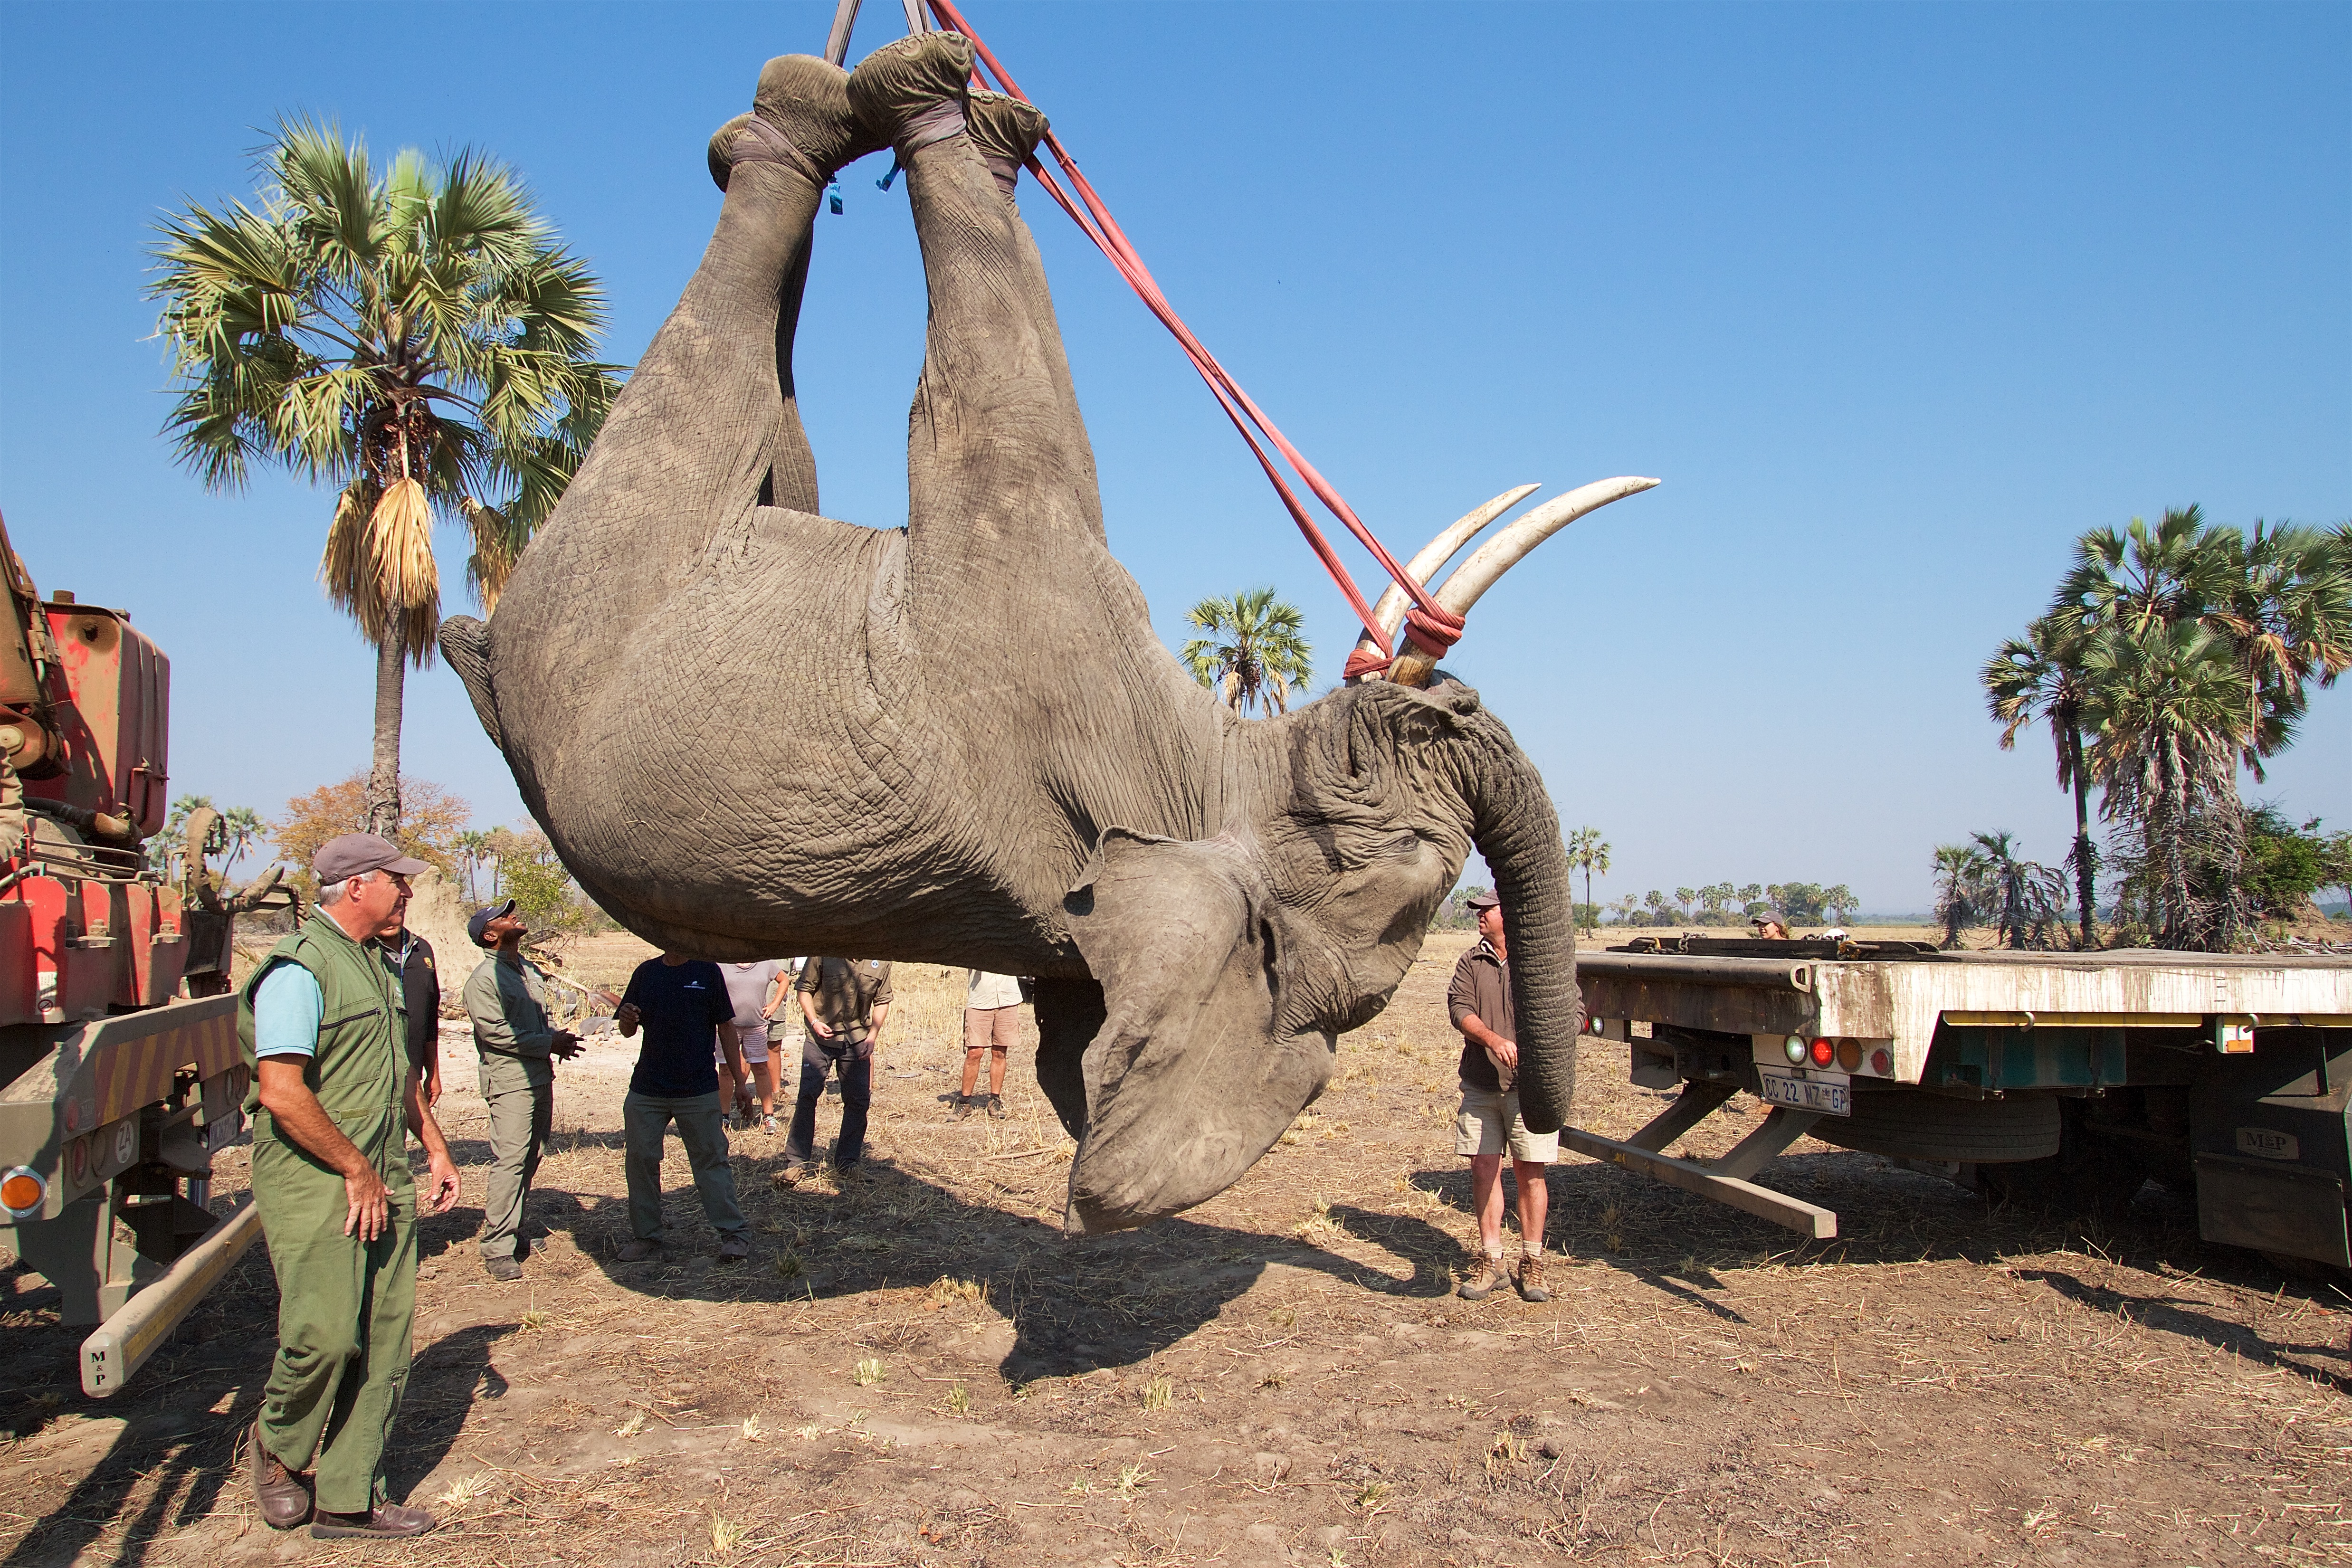 An elephant is lifted by crane to be weighed and transported to the wake up crate. Photo by Frank Weitzer.